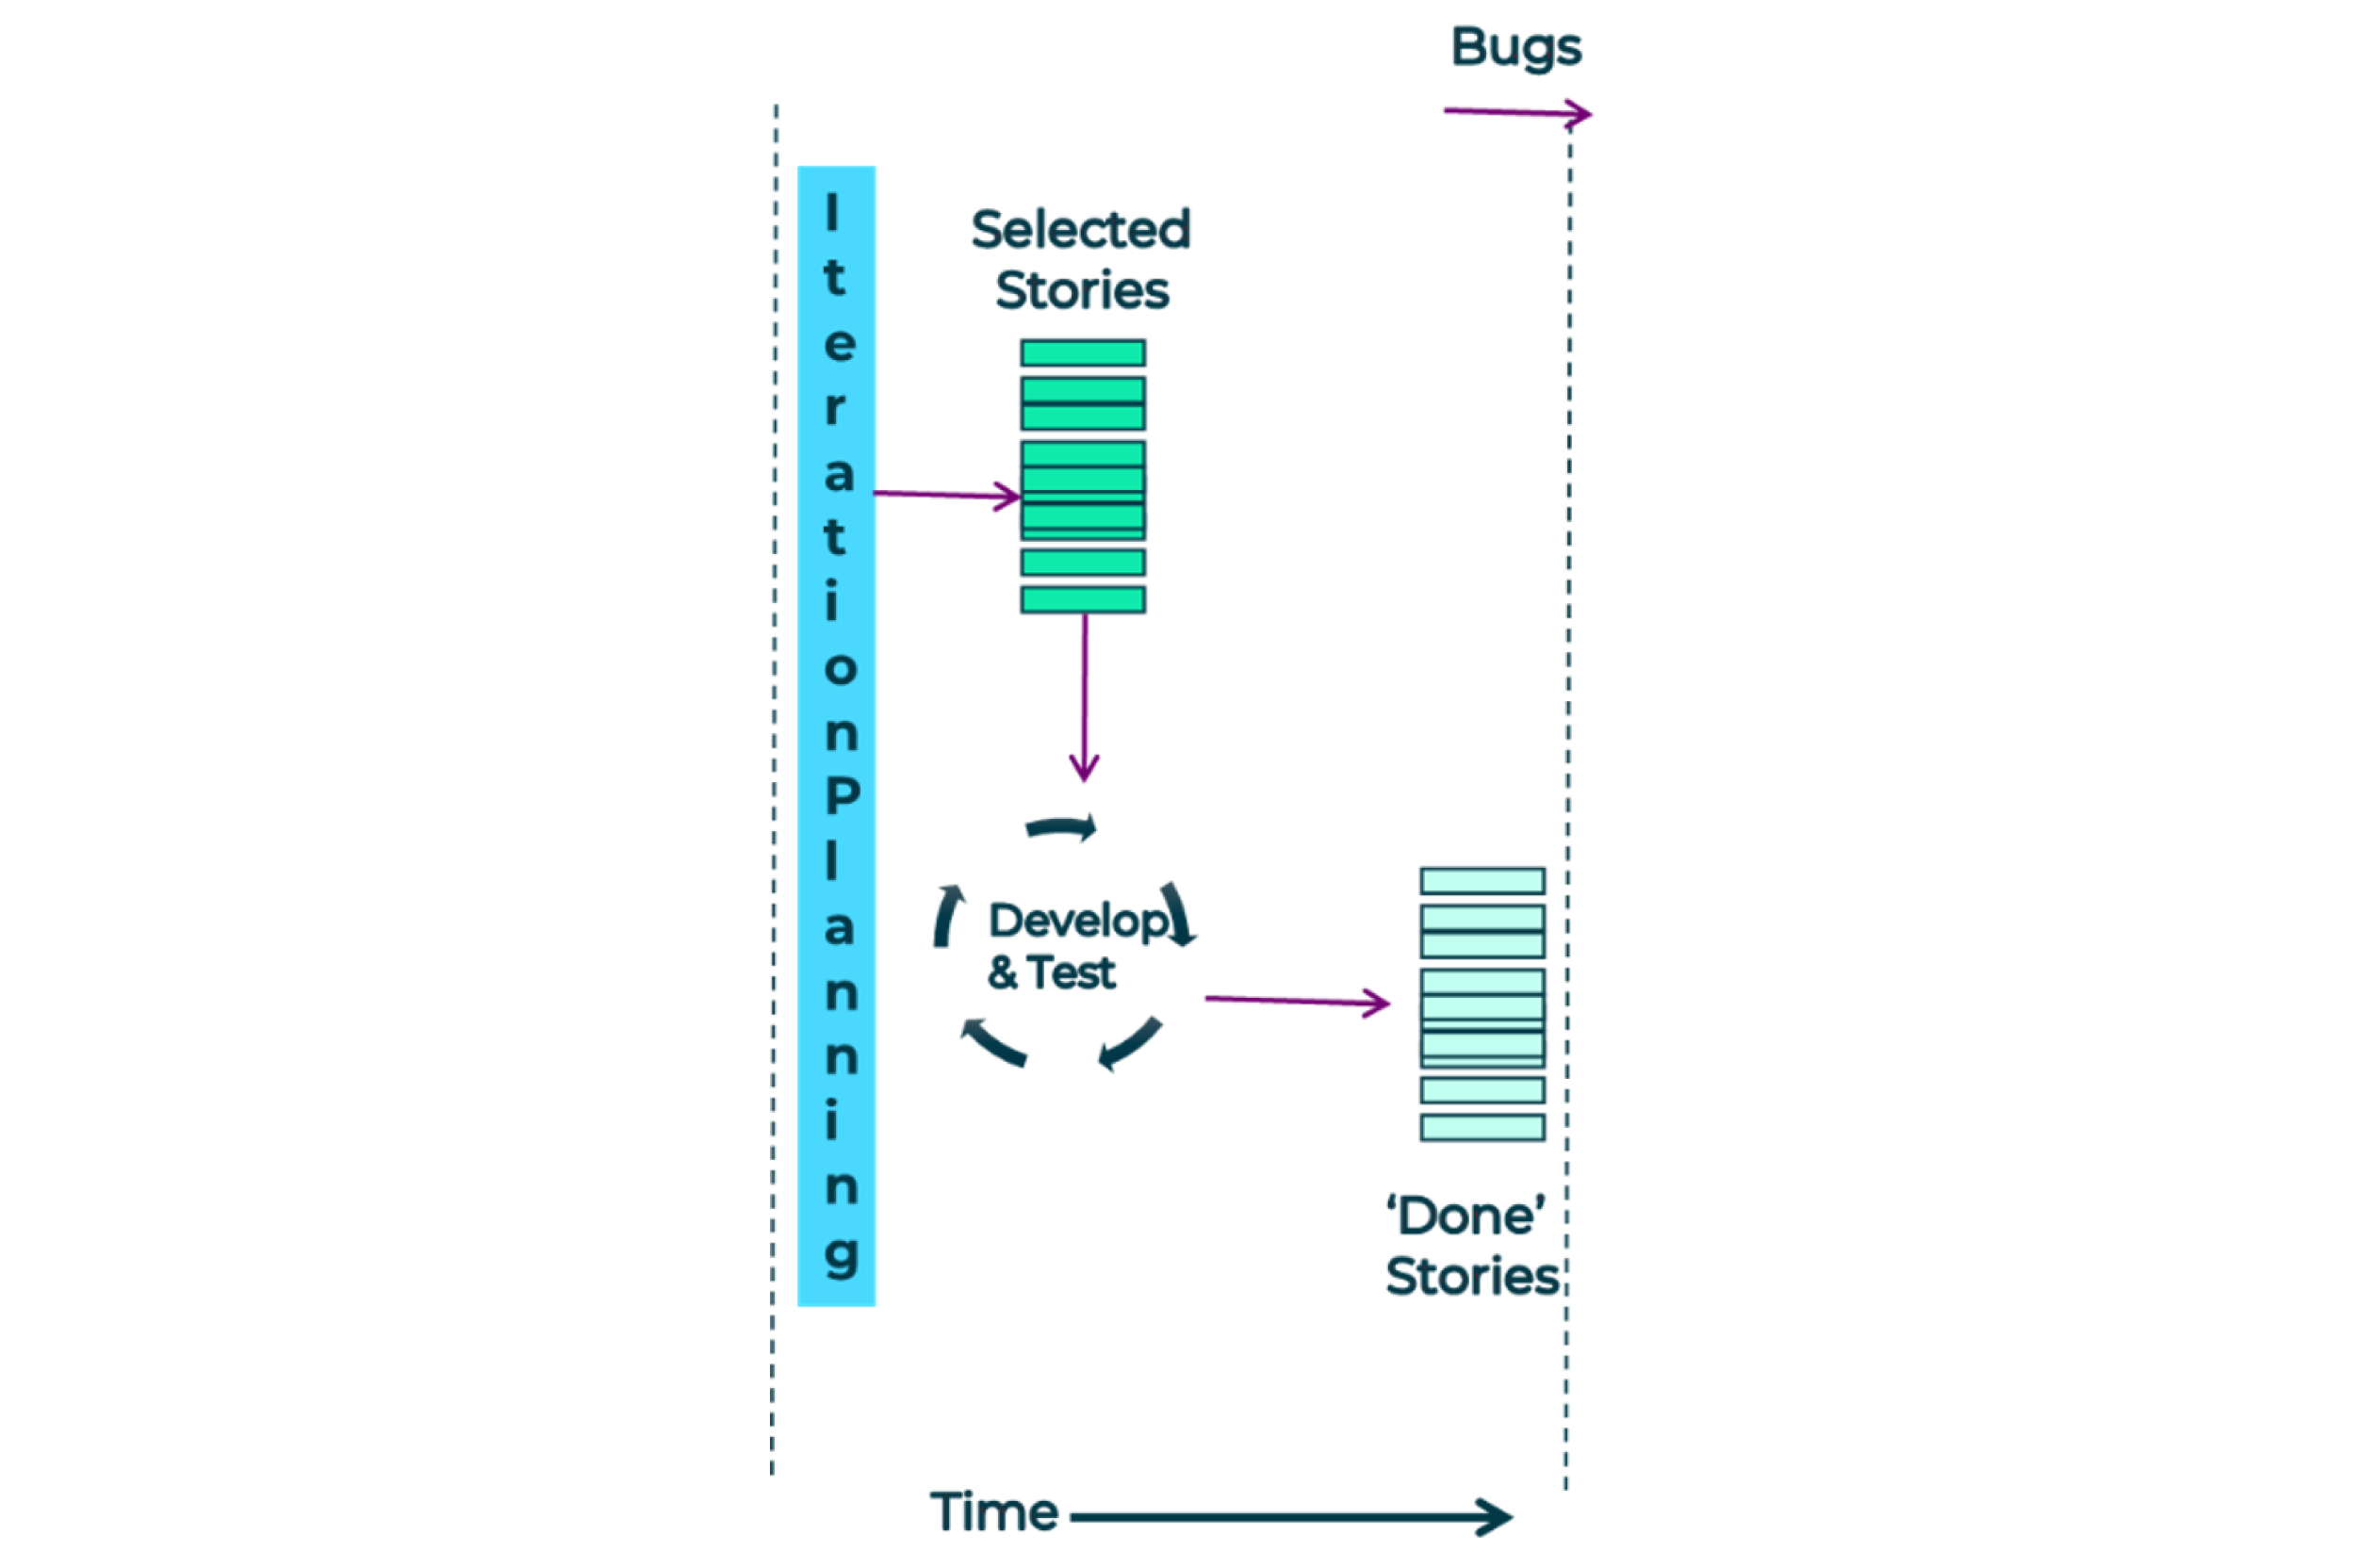 A diagram showing iteration planning resulting in selected stories, which are then developed and tested, resulting in ‘done’ stories. At this point, bugs start appearing.